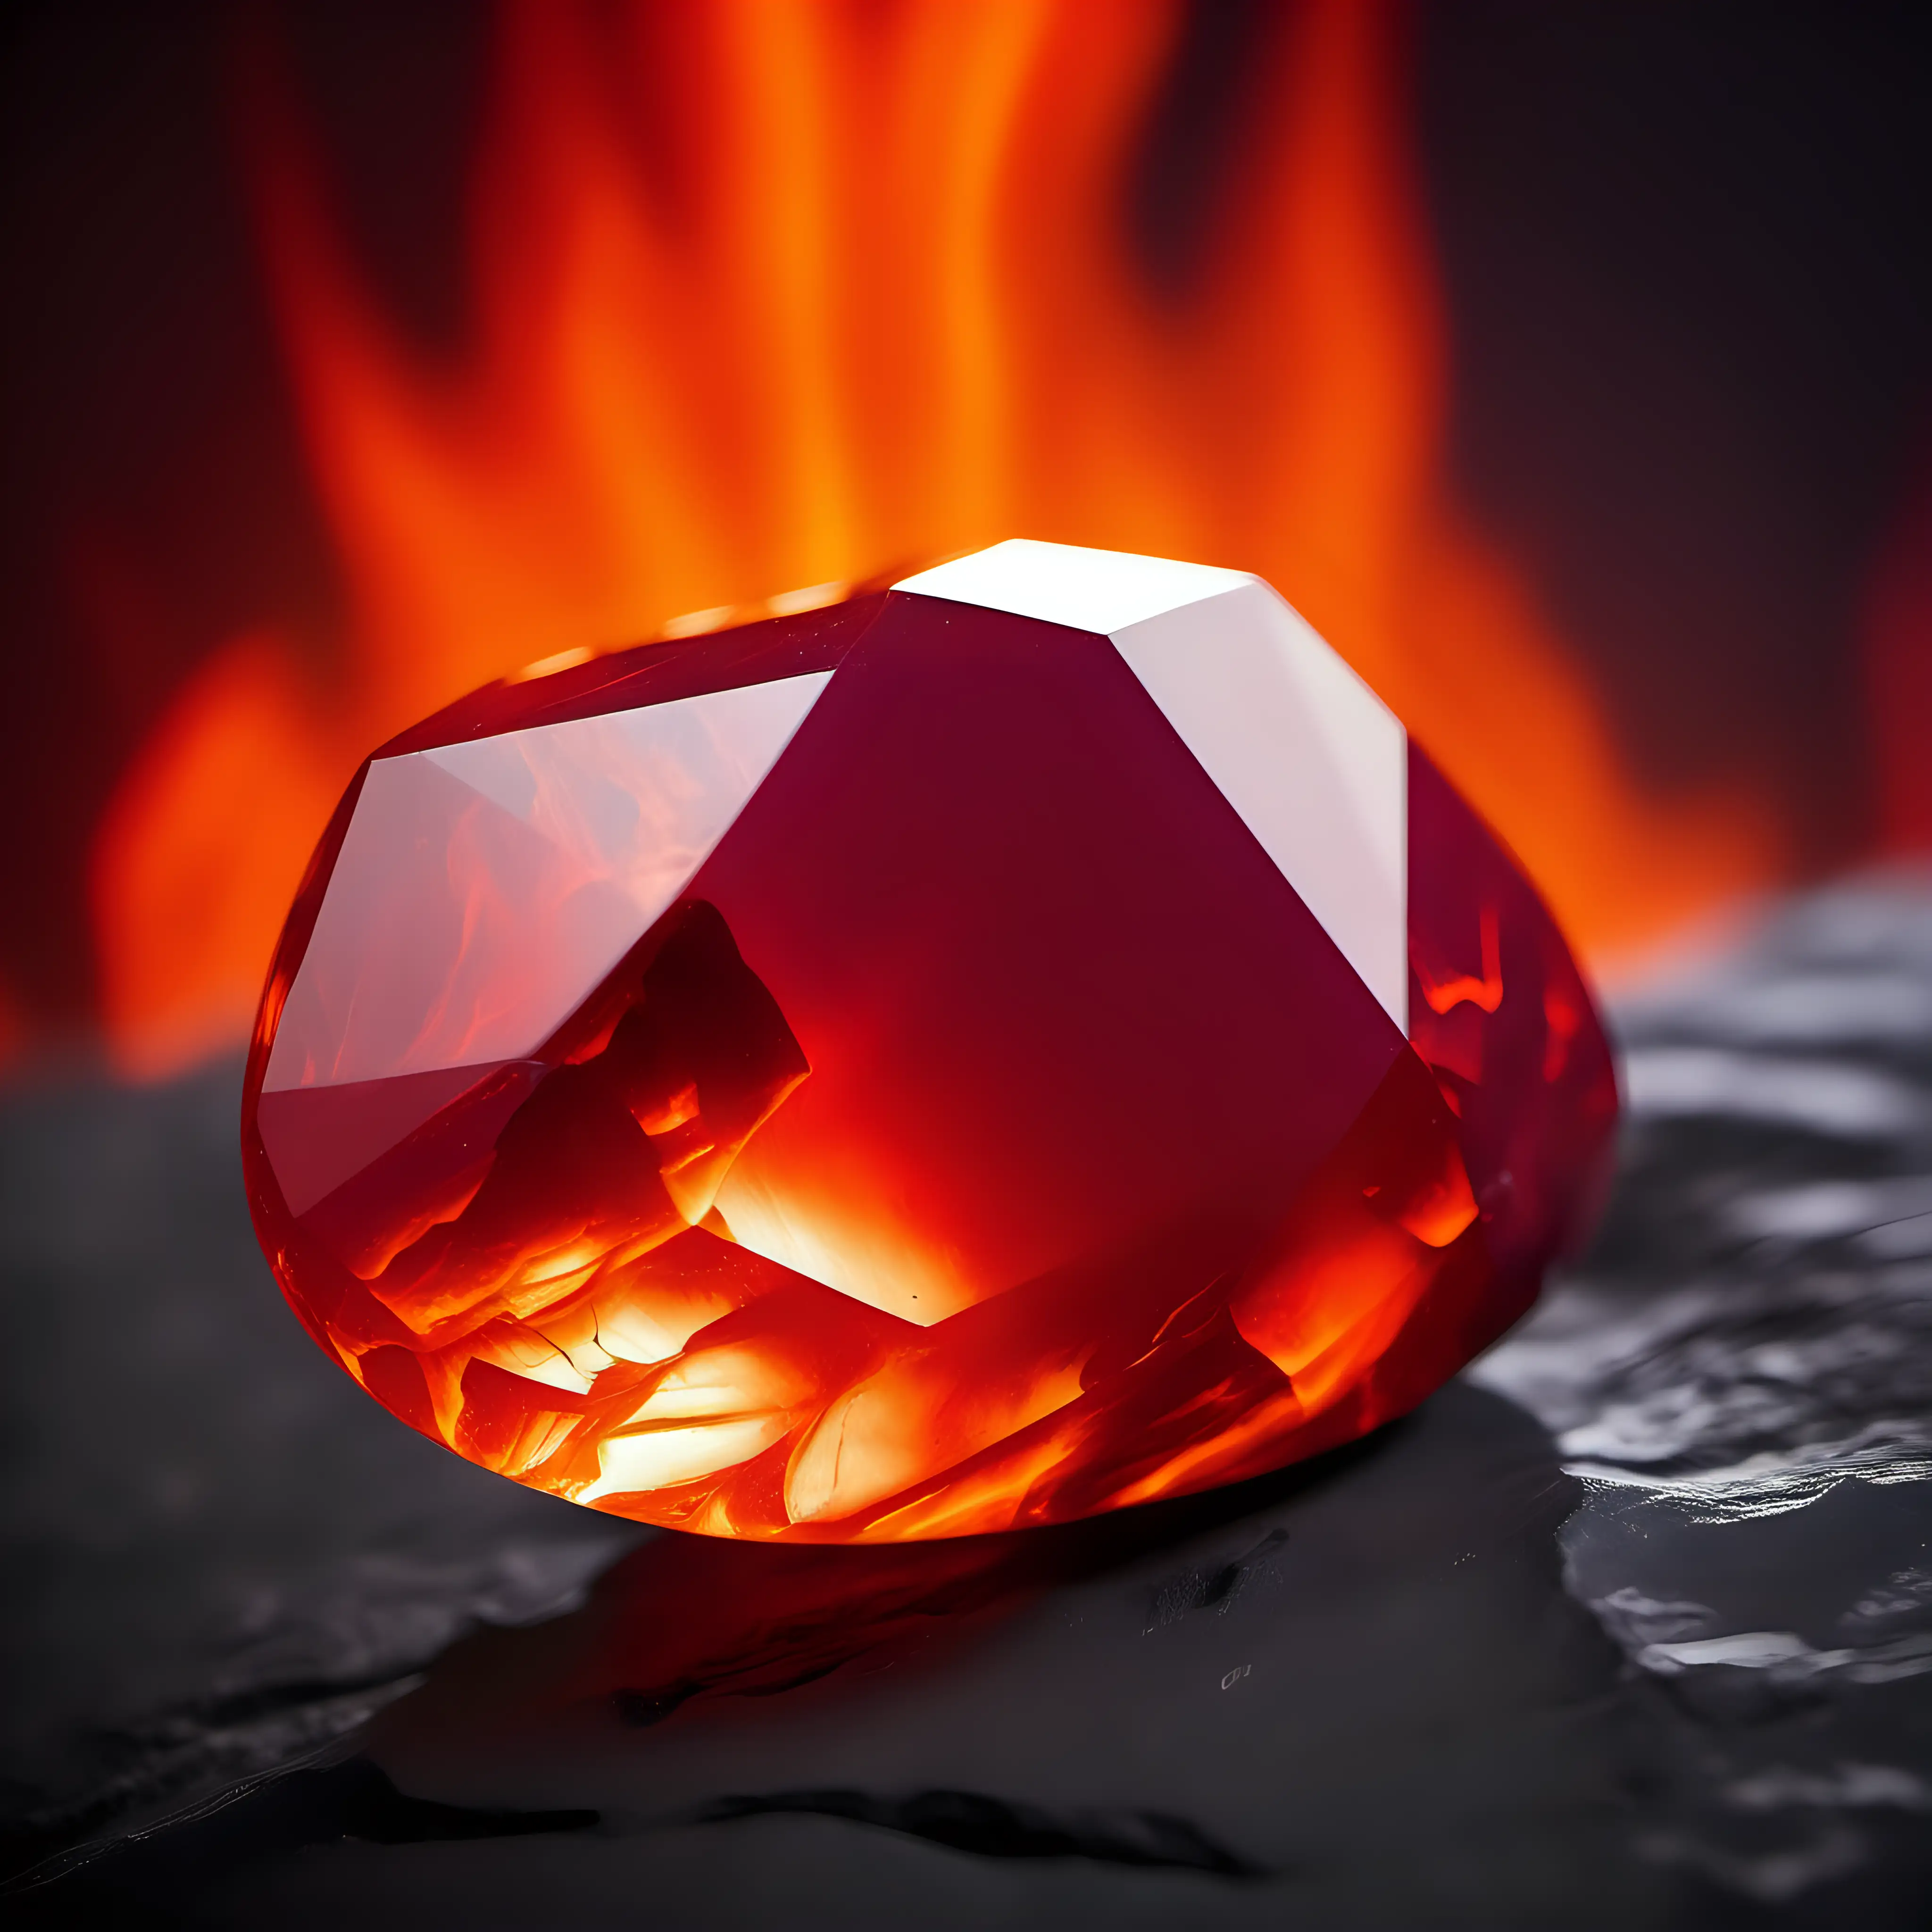 A crimson and orange stone on a fiery background